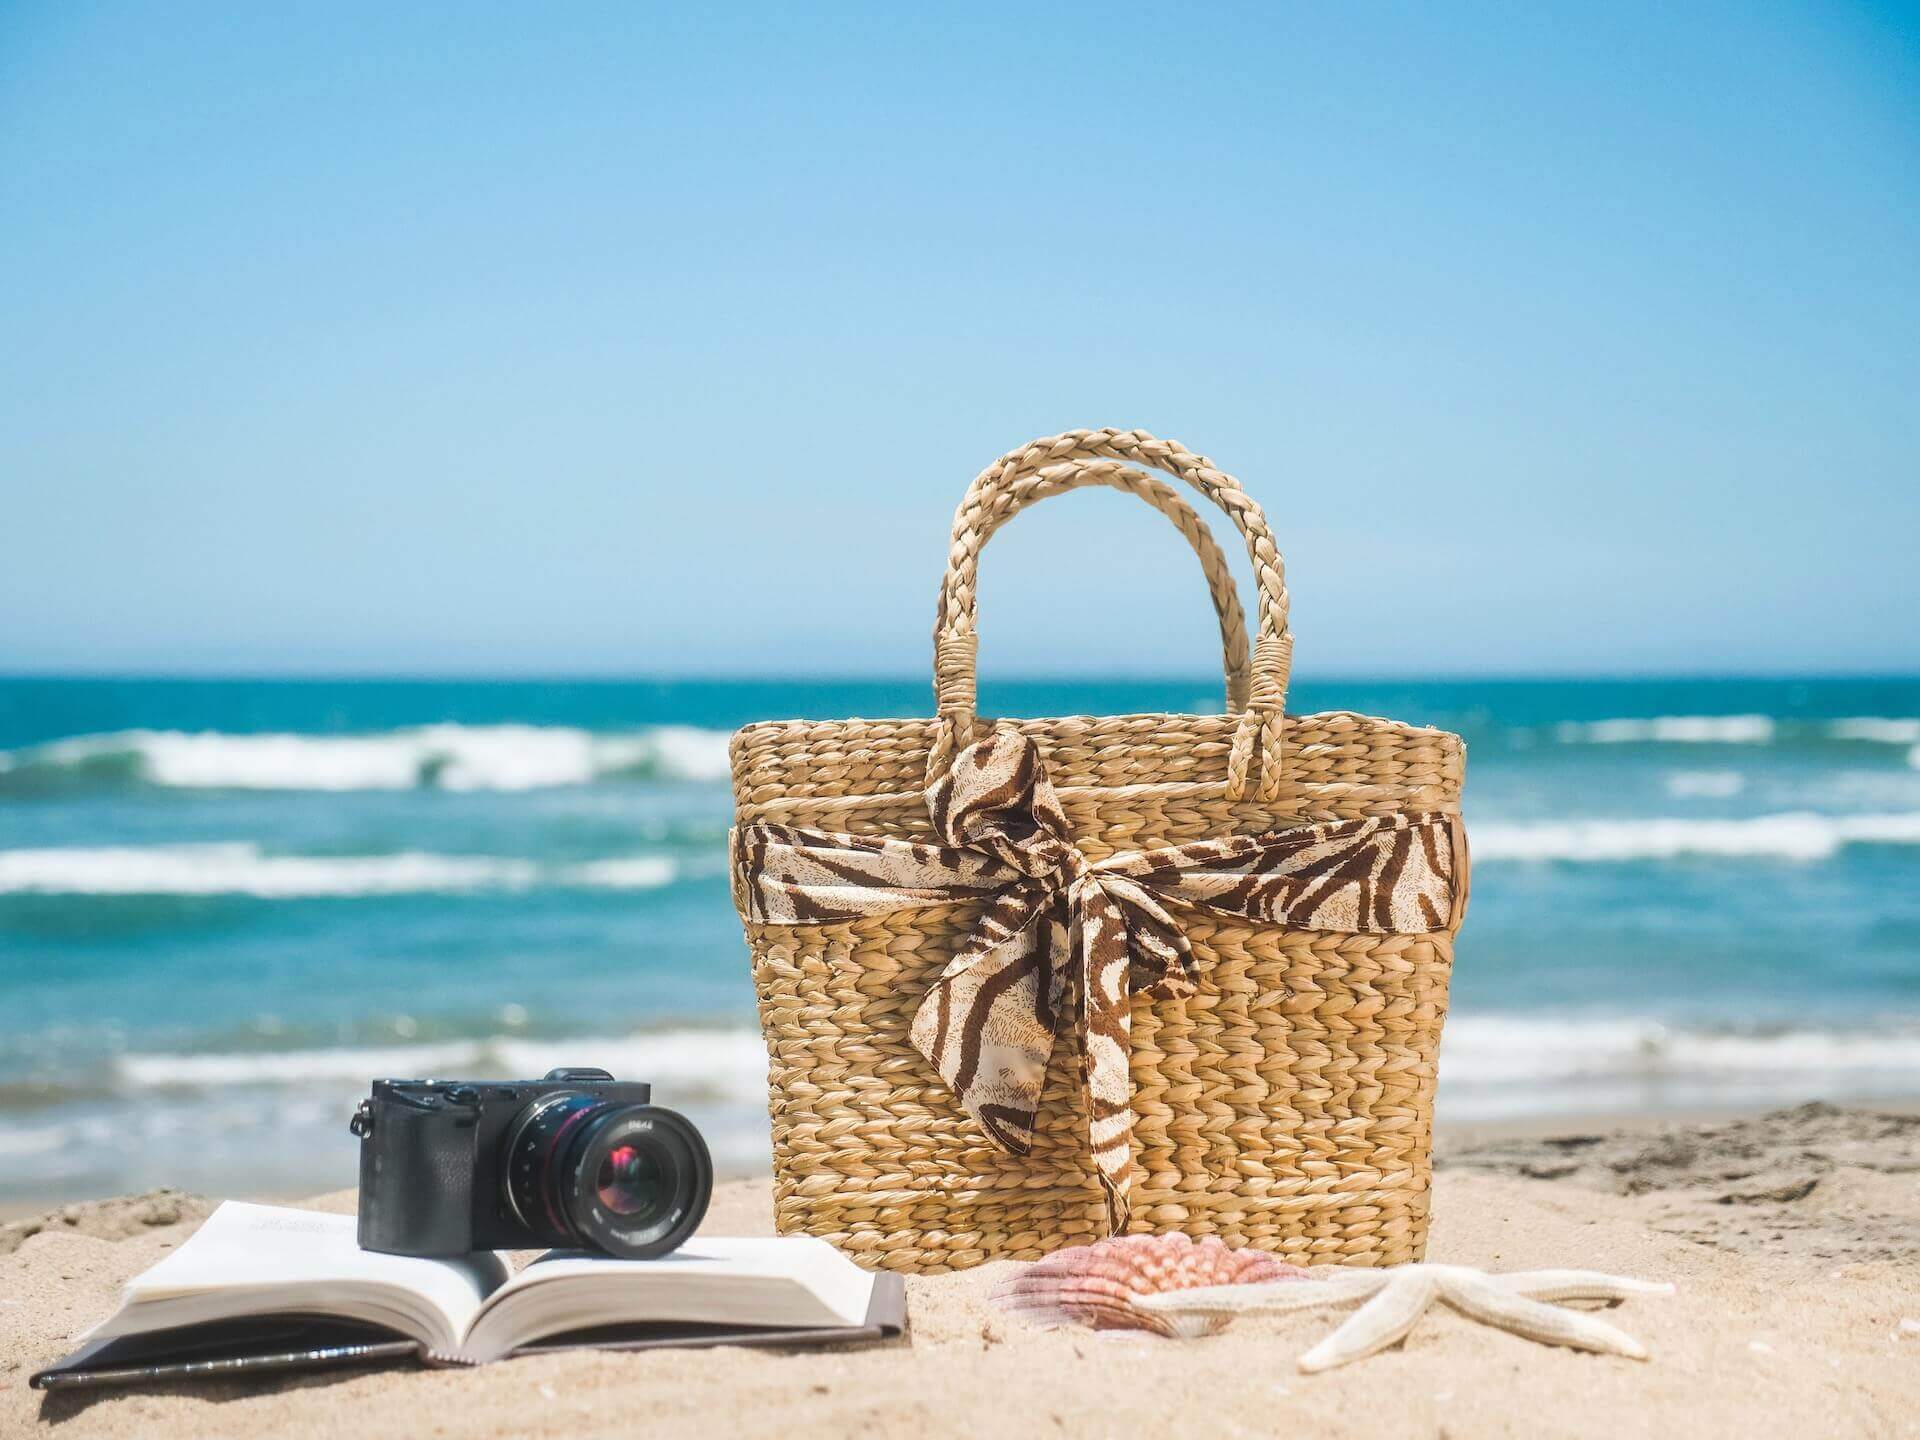 Beach bag and a book with a camera on the sand